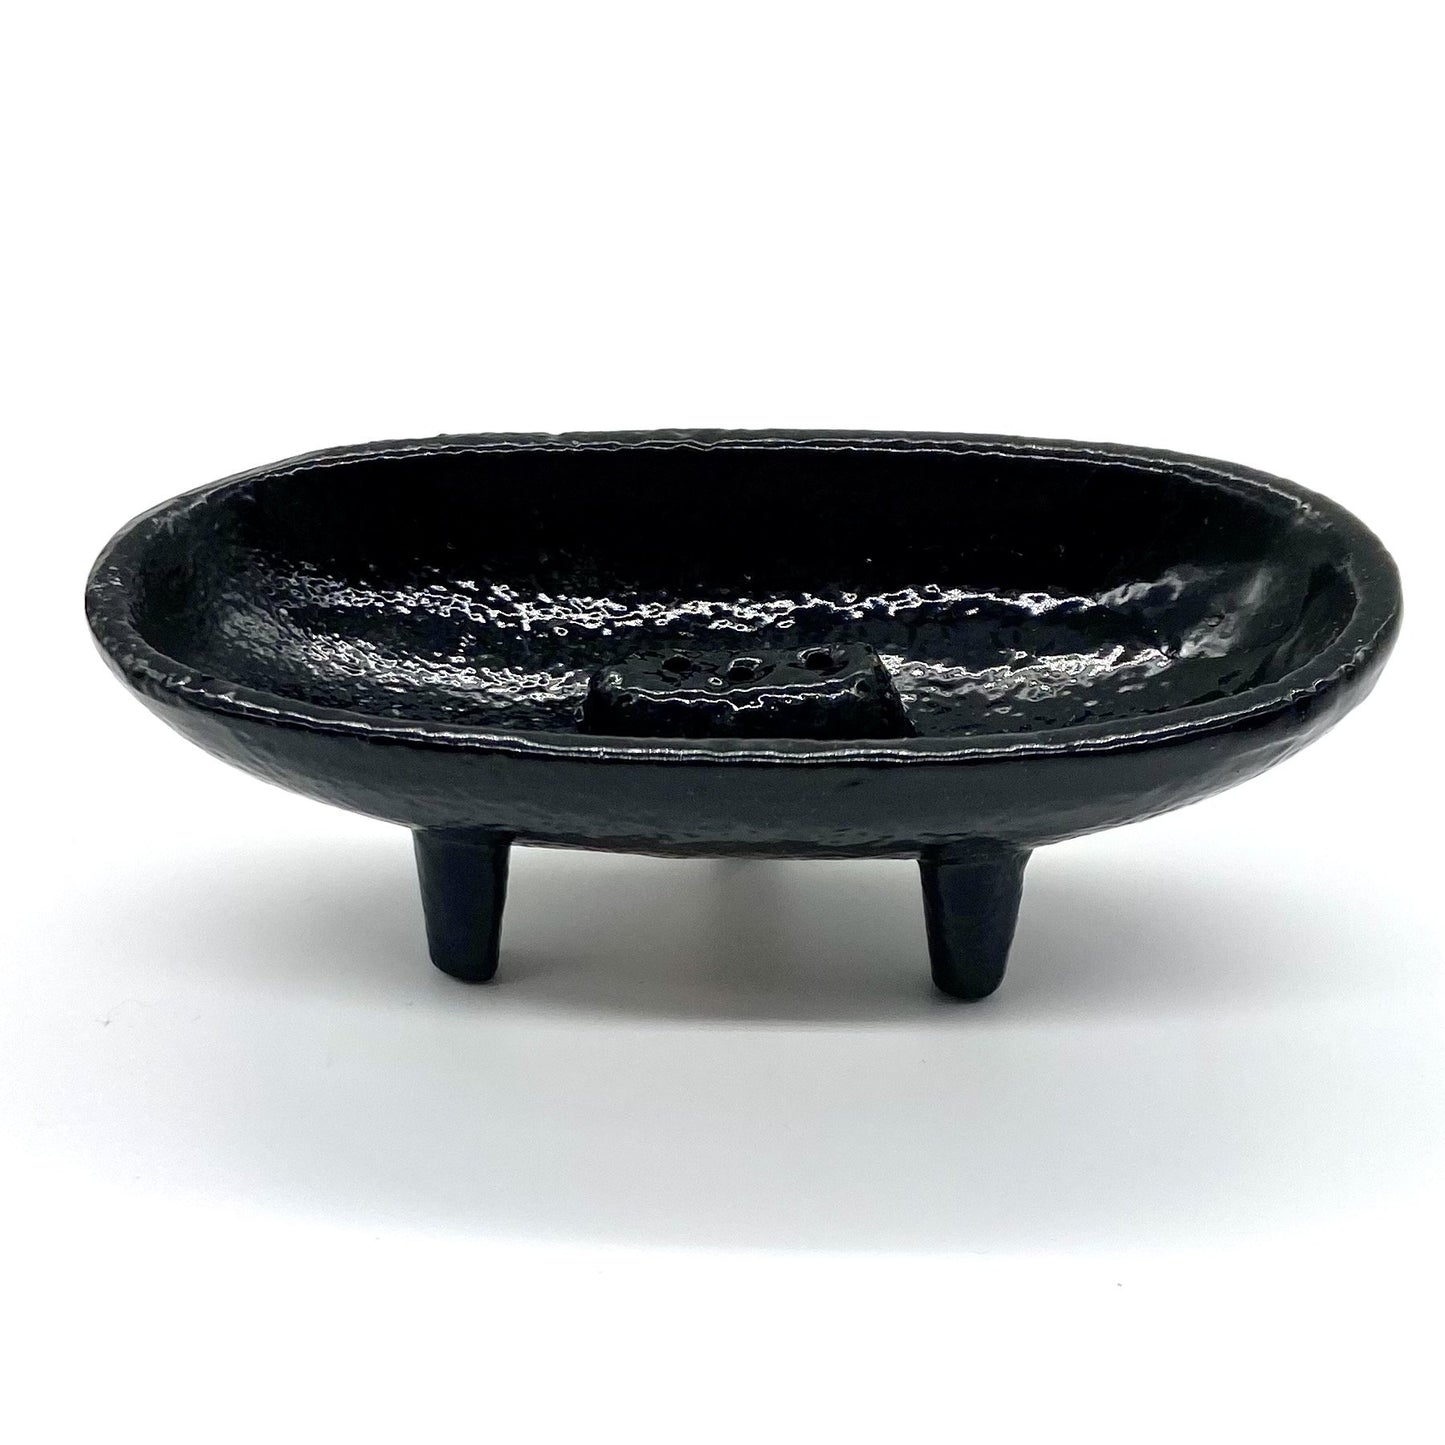 Cast iron incense burner in boat shape with legs.